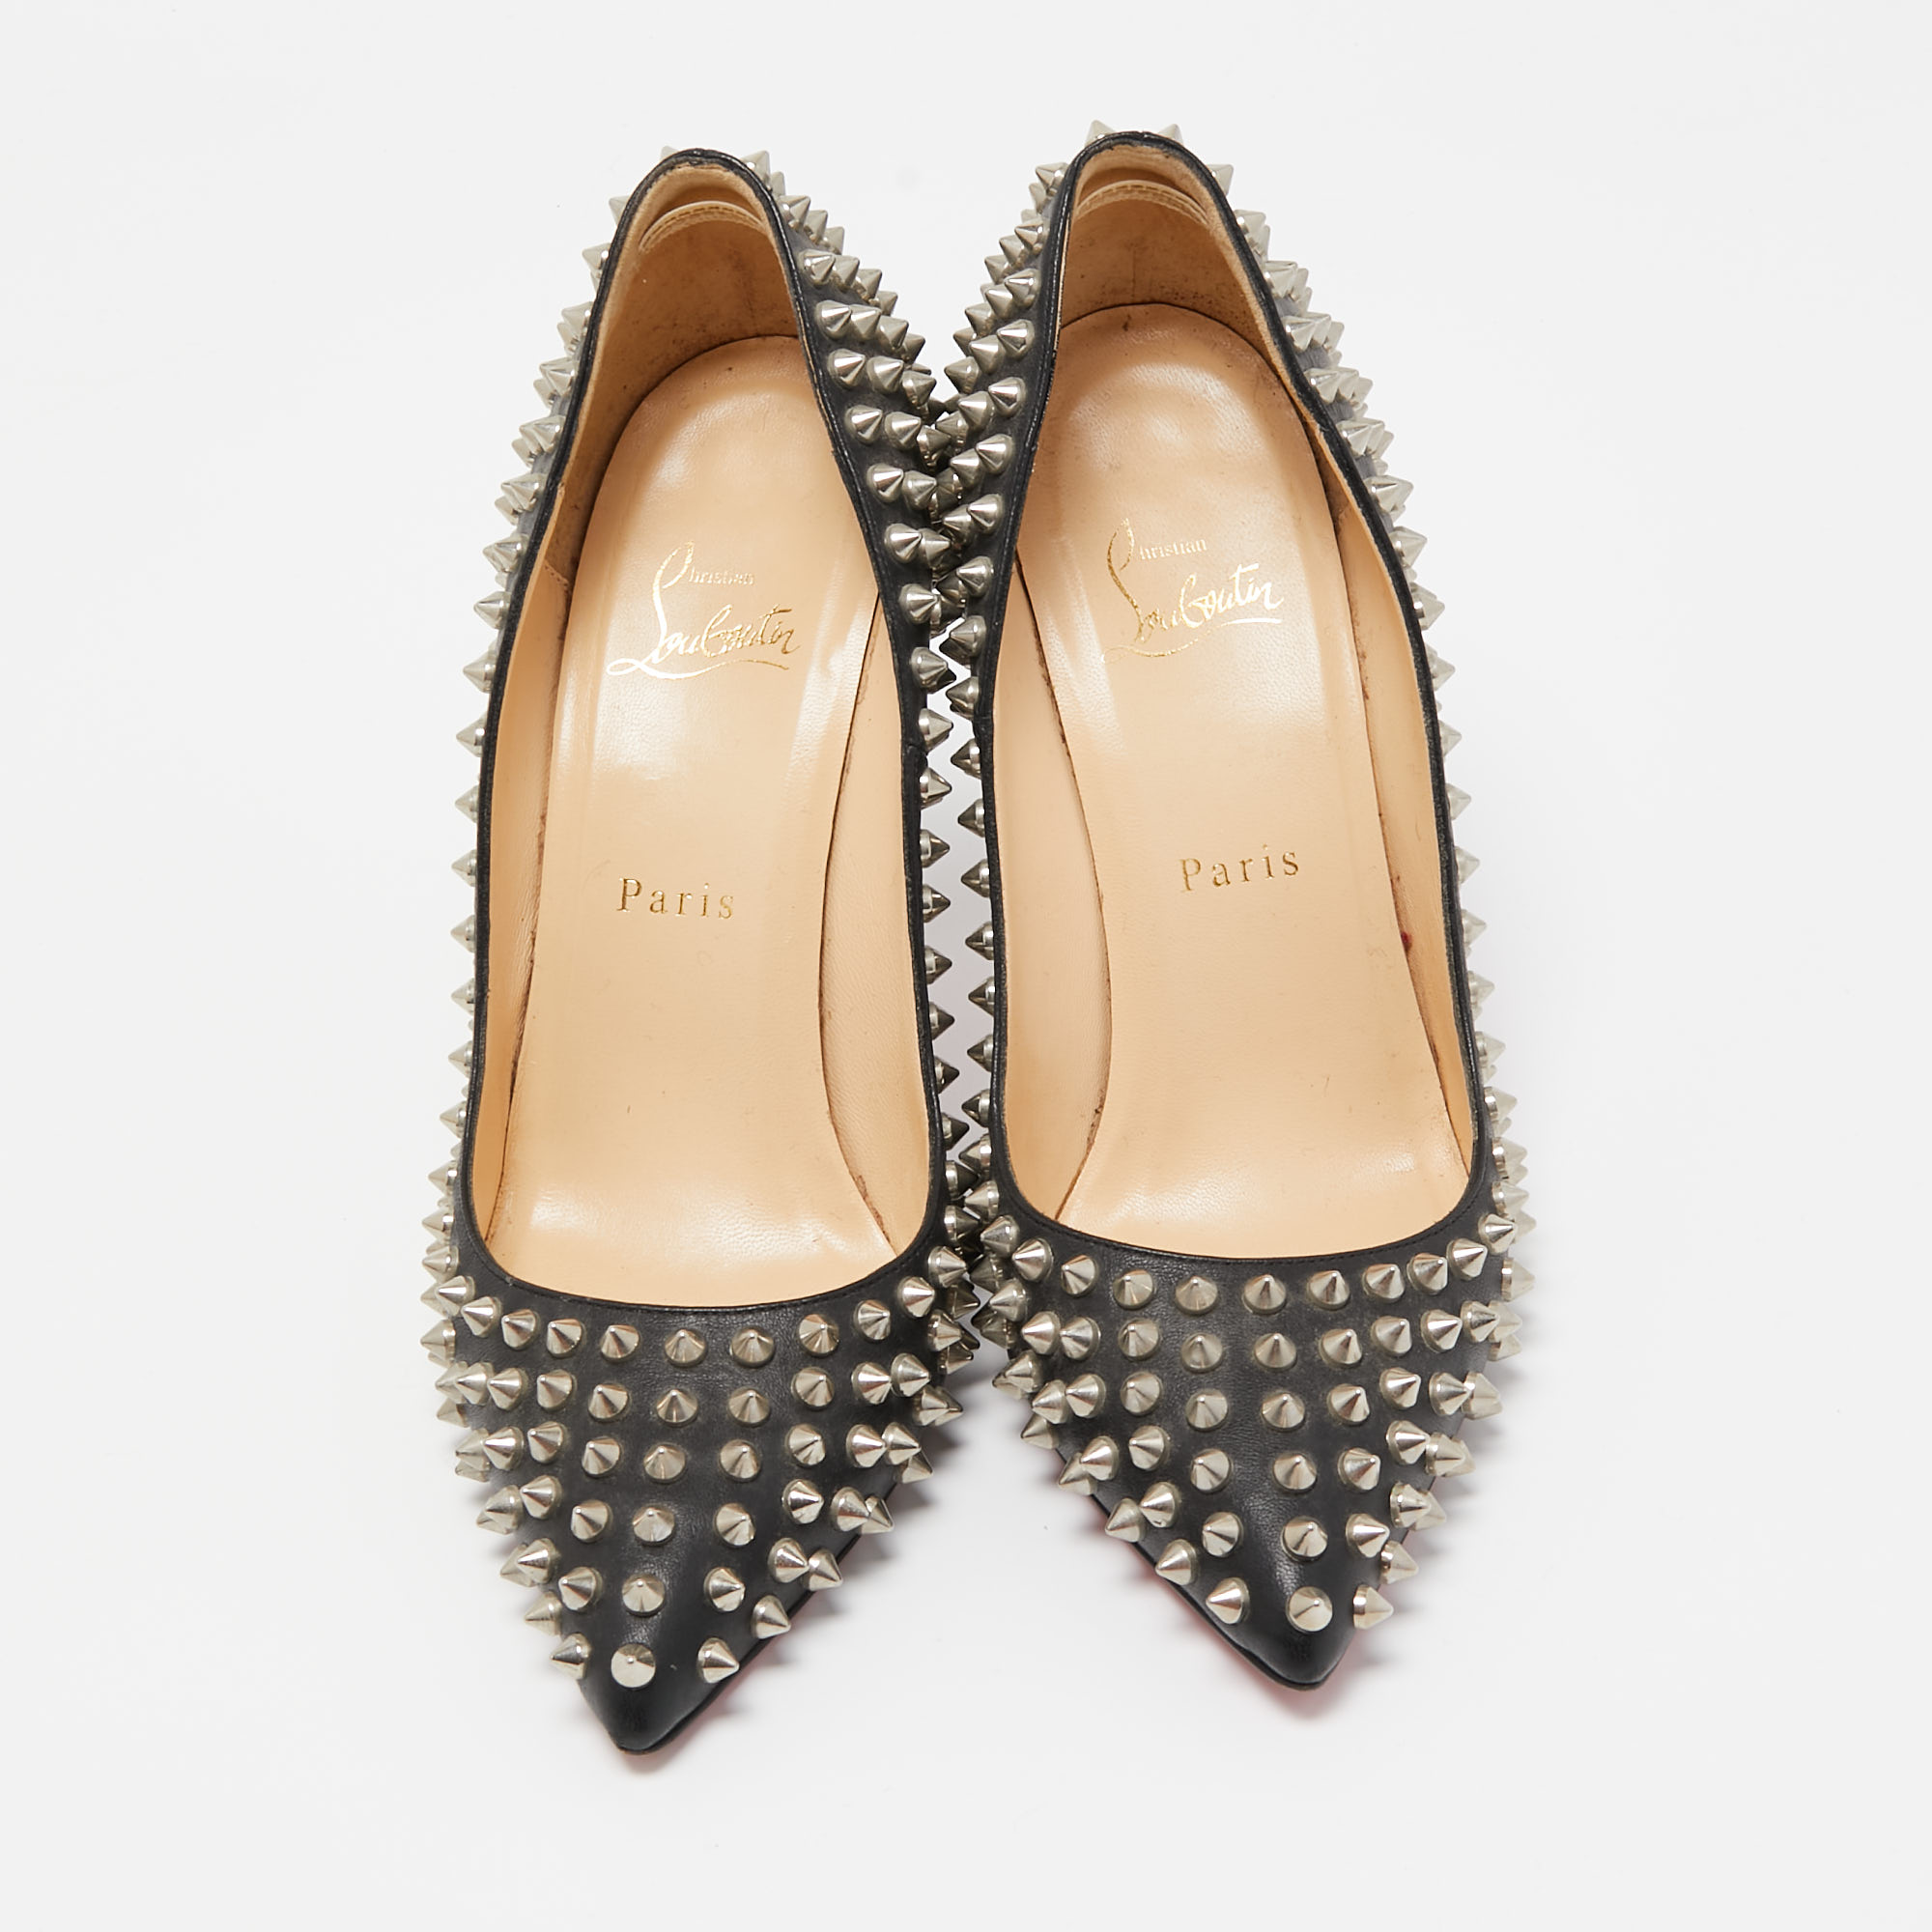 Christian Louboutin Black Leather Pigalle Spikes Pointed Toe Pumps Size 38.5